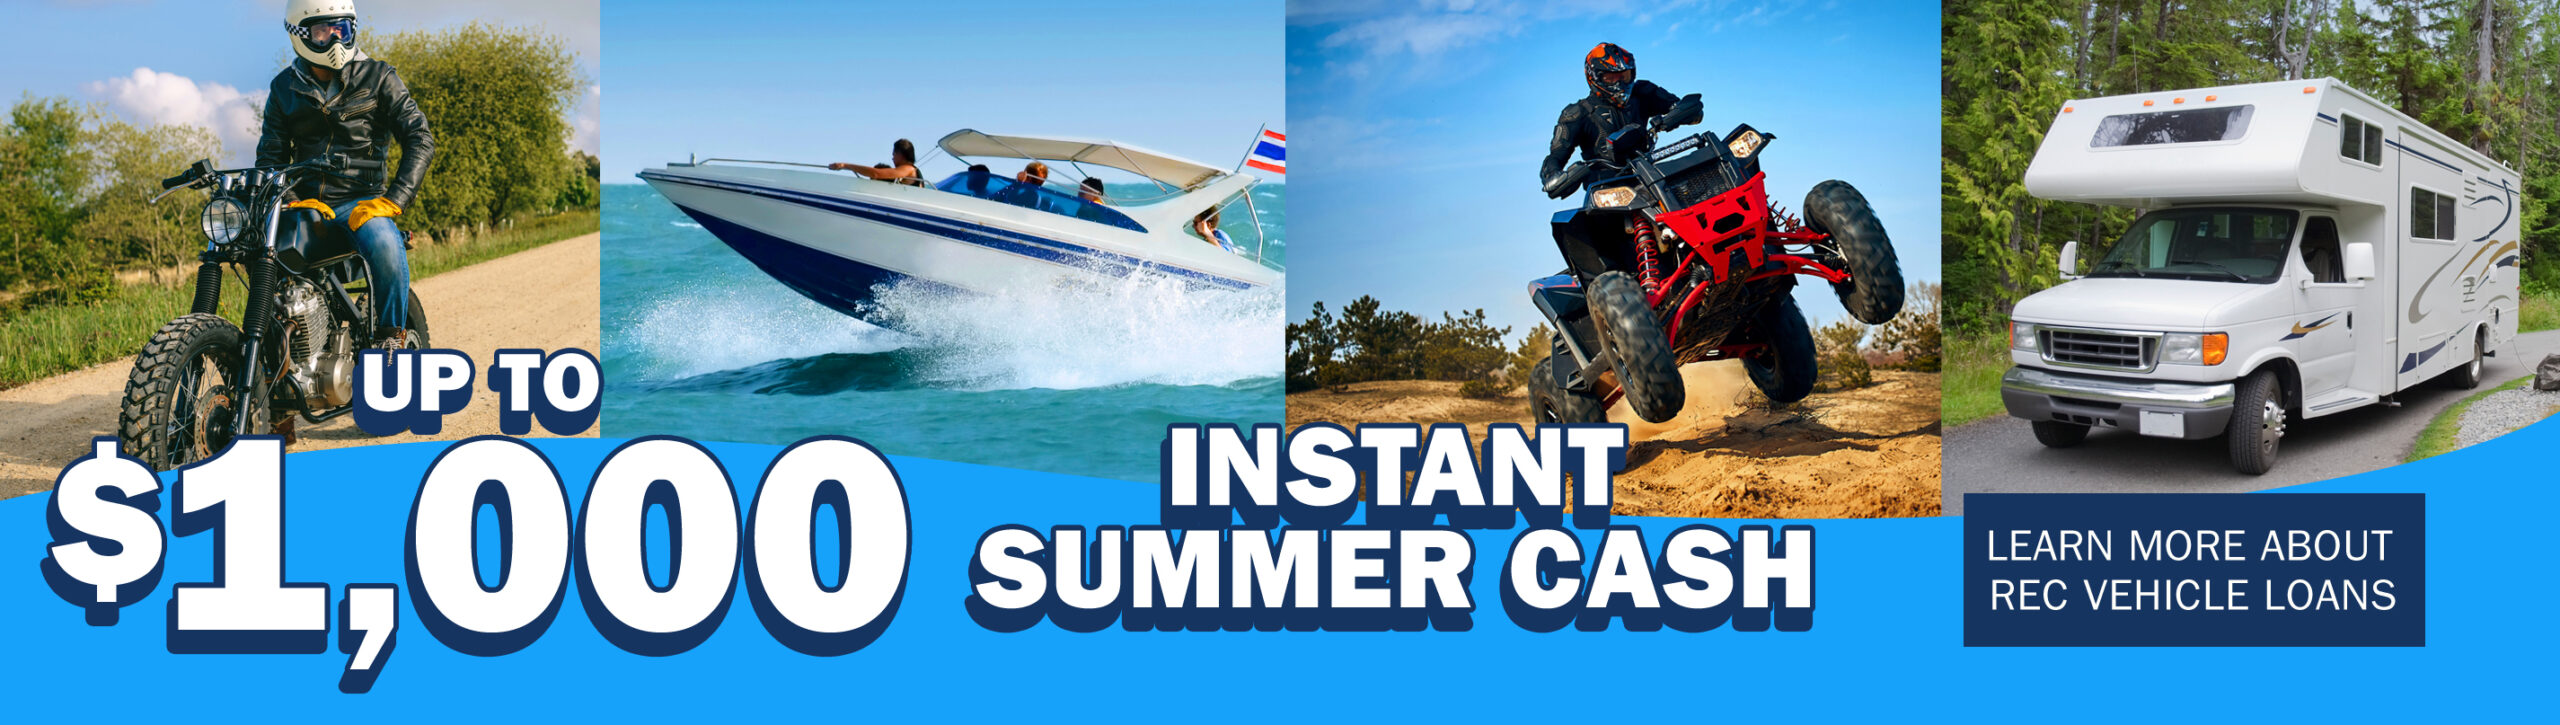 Rev'd up savings. Learn More about Recreational Vehicle Loans. Instant Summer Cash up to $1,000*